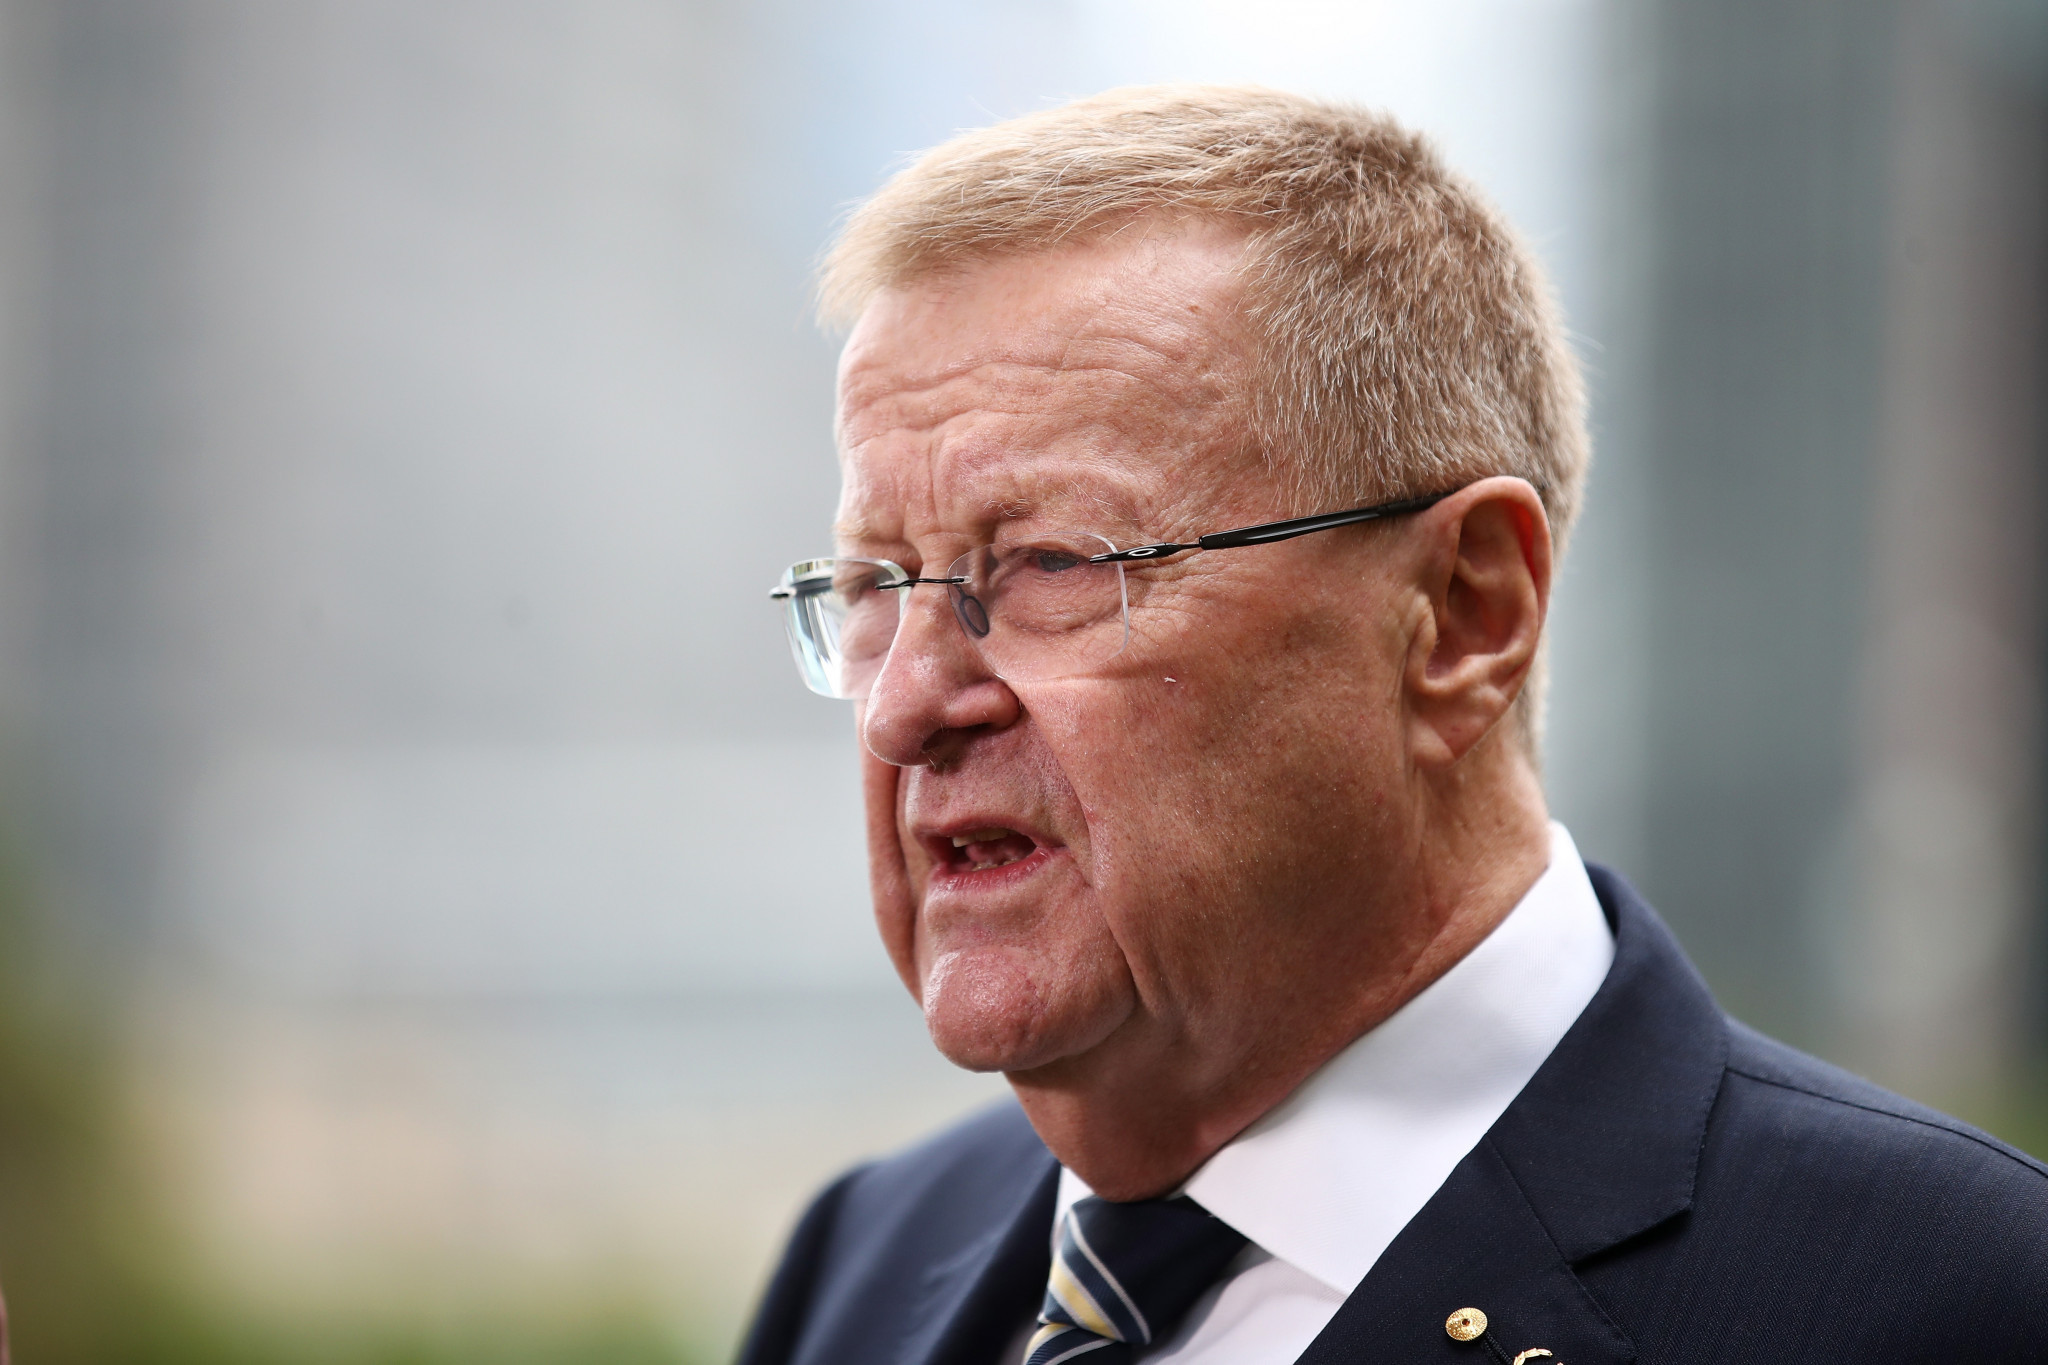 John Coates has confirmed he will step down as President of the Australian Olympic Committee in 2022 having led the organisation since 1990 ©Getty Images